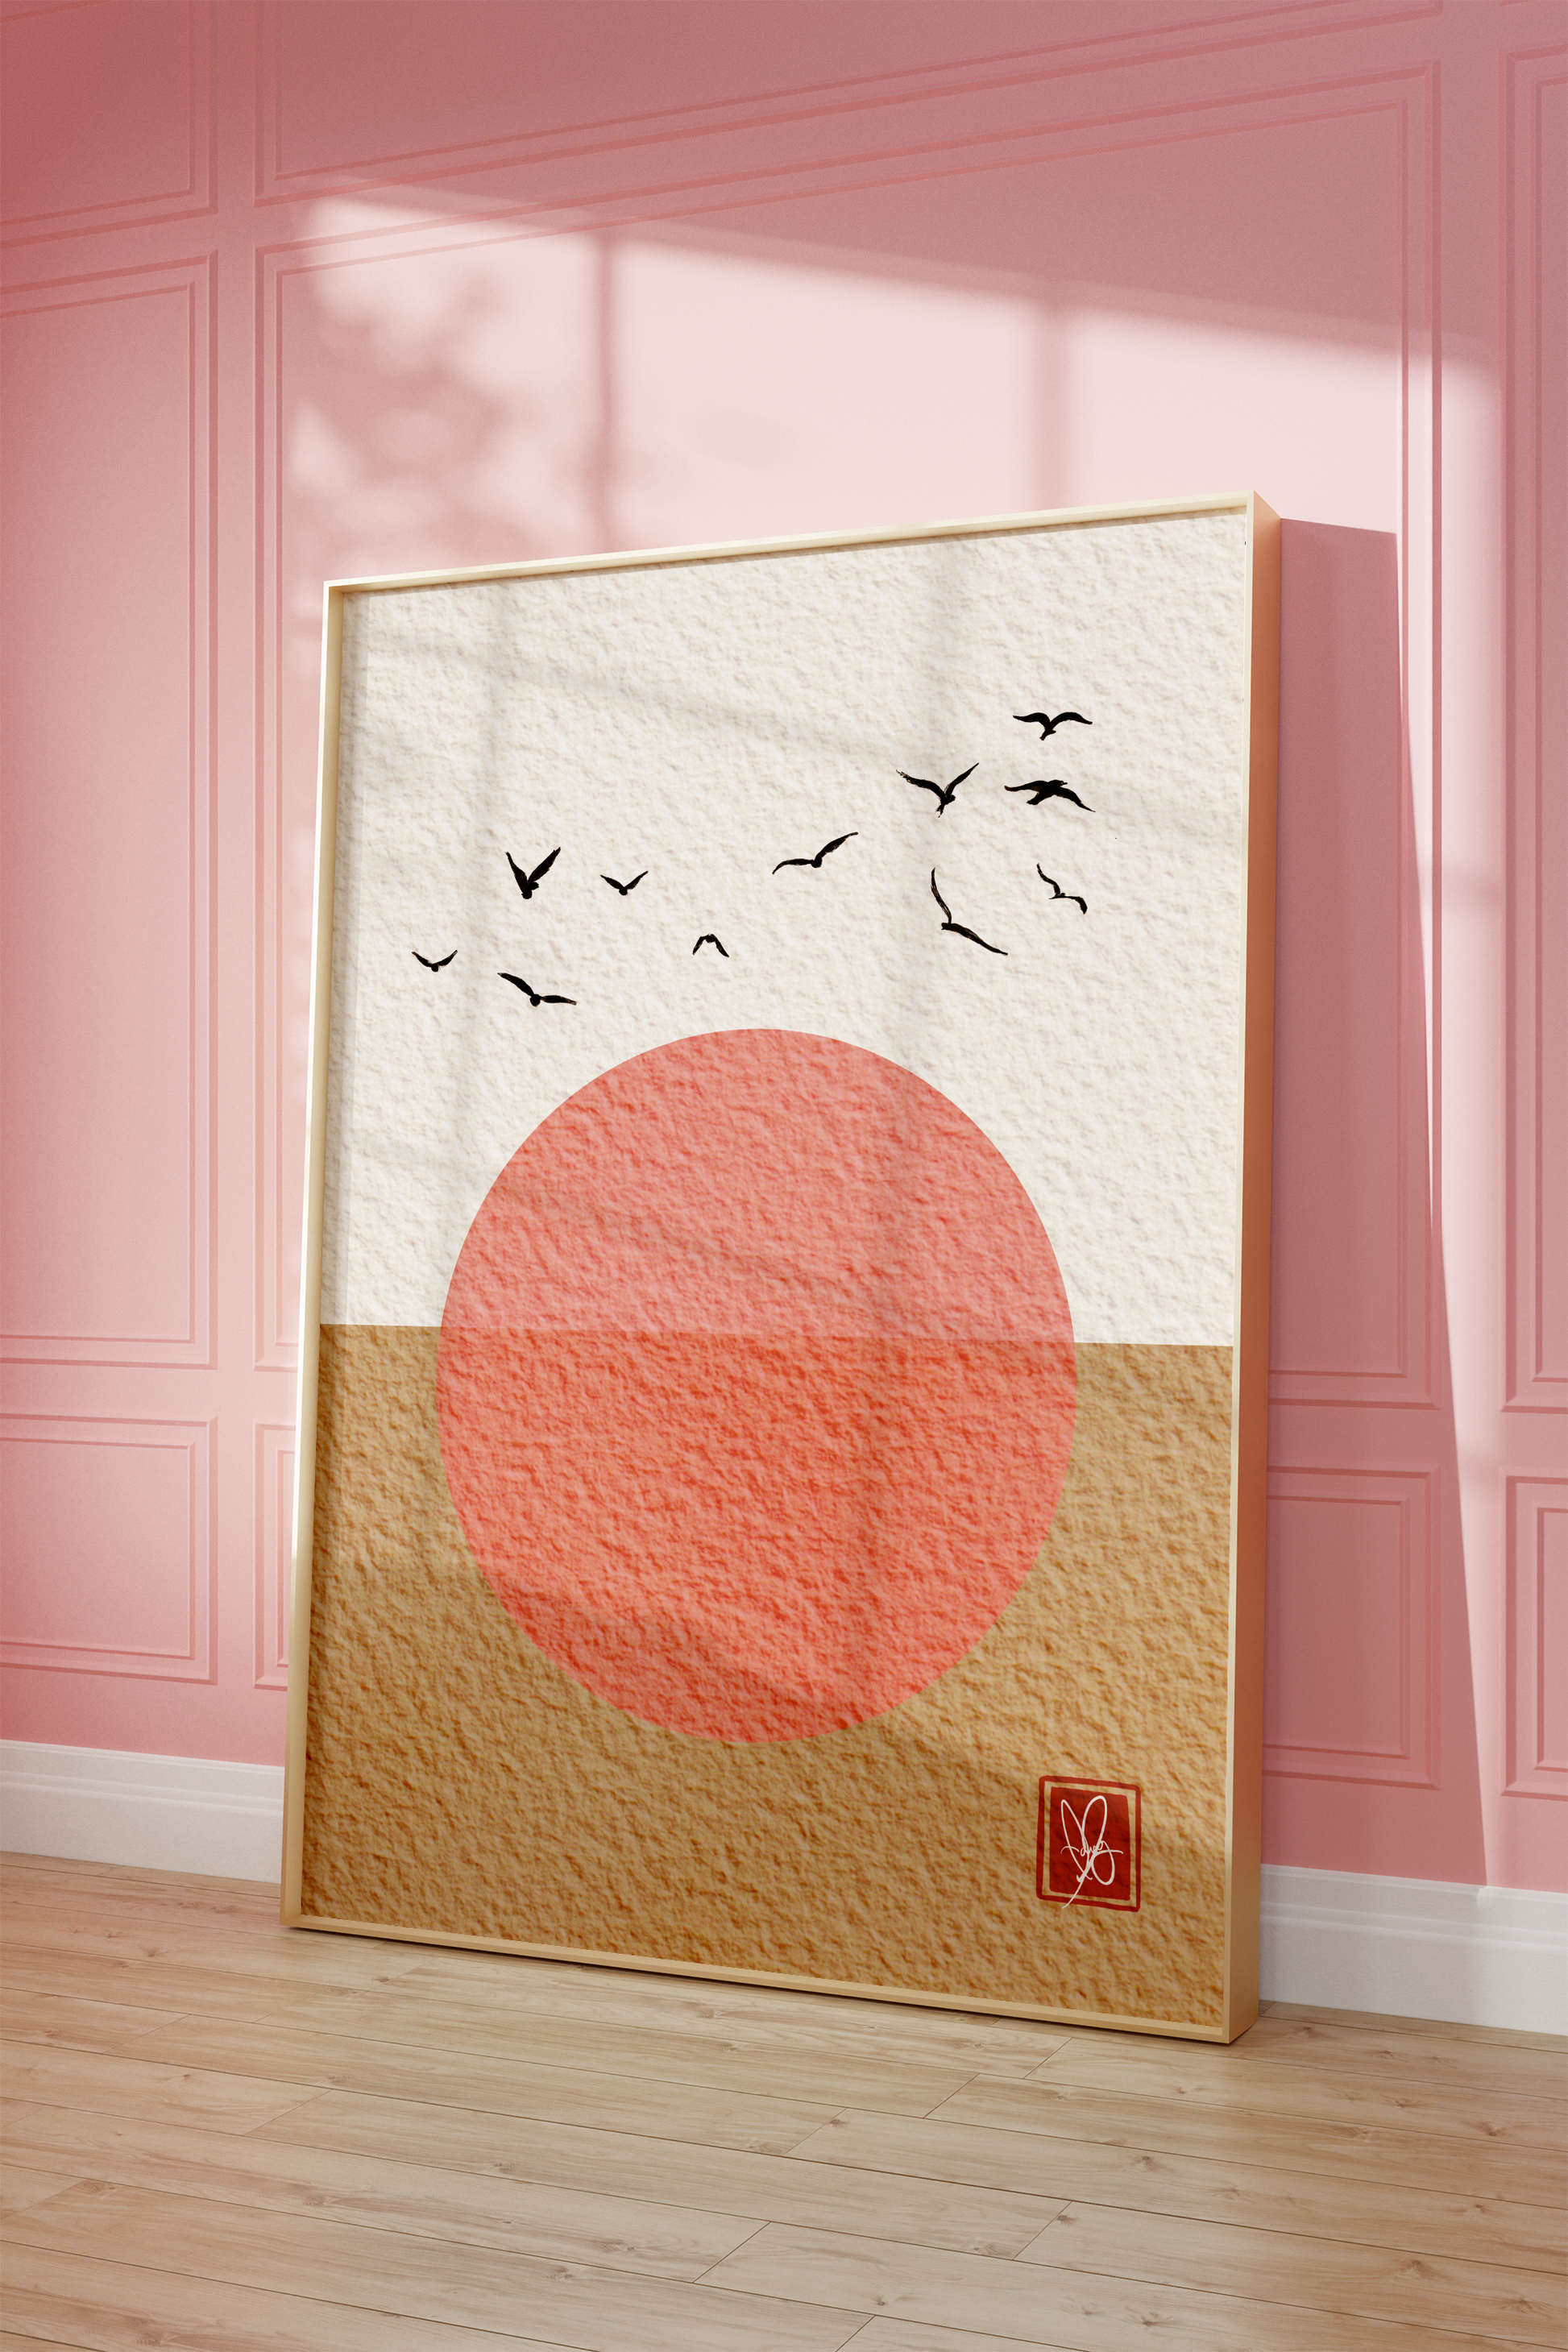 Japandi-Inspired Calligraphy Birds Print by Unwrapped Collections: Oriental elegance meets Scandinavian minimalism in this serene artwork featuring hand-drawn birds in calligraphic style. Perfect for adding tranquility to any room. Available in various sizes. Shop now!